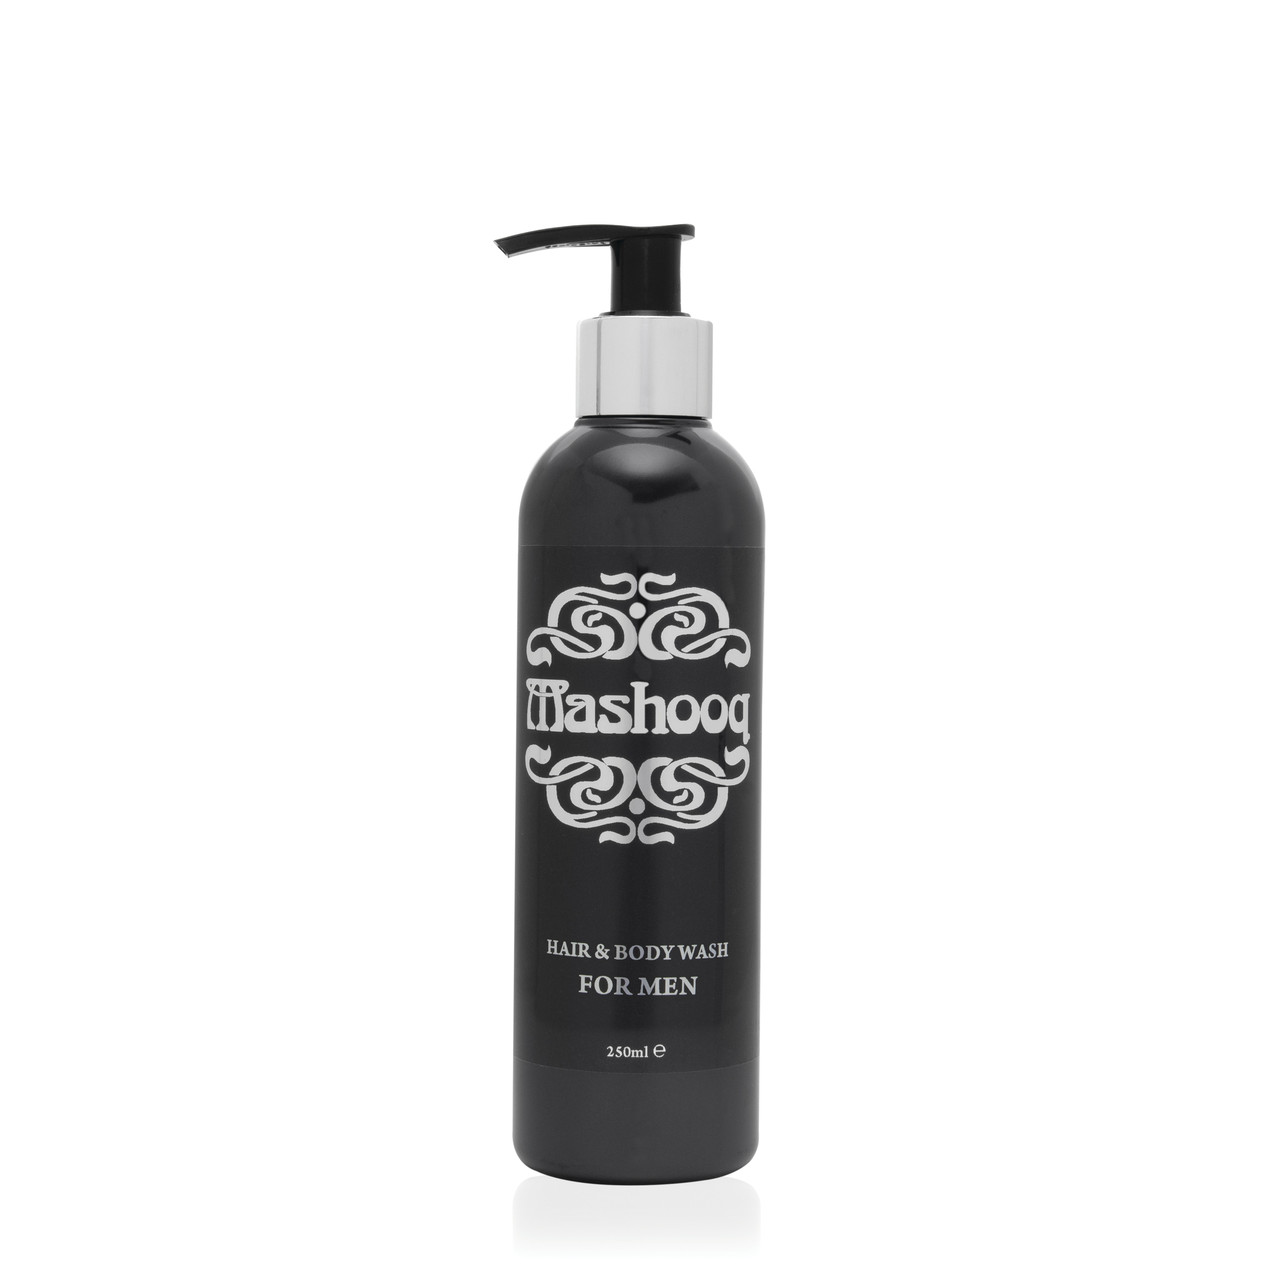 Always formulated from a good quality non drying cleanser base, then powerfully fragranced with the full intent of leaving the hair/body dowsed with additional masculine overtones. You are irresistible. Perfect for everyday.